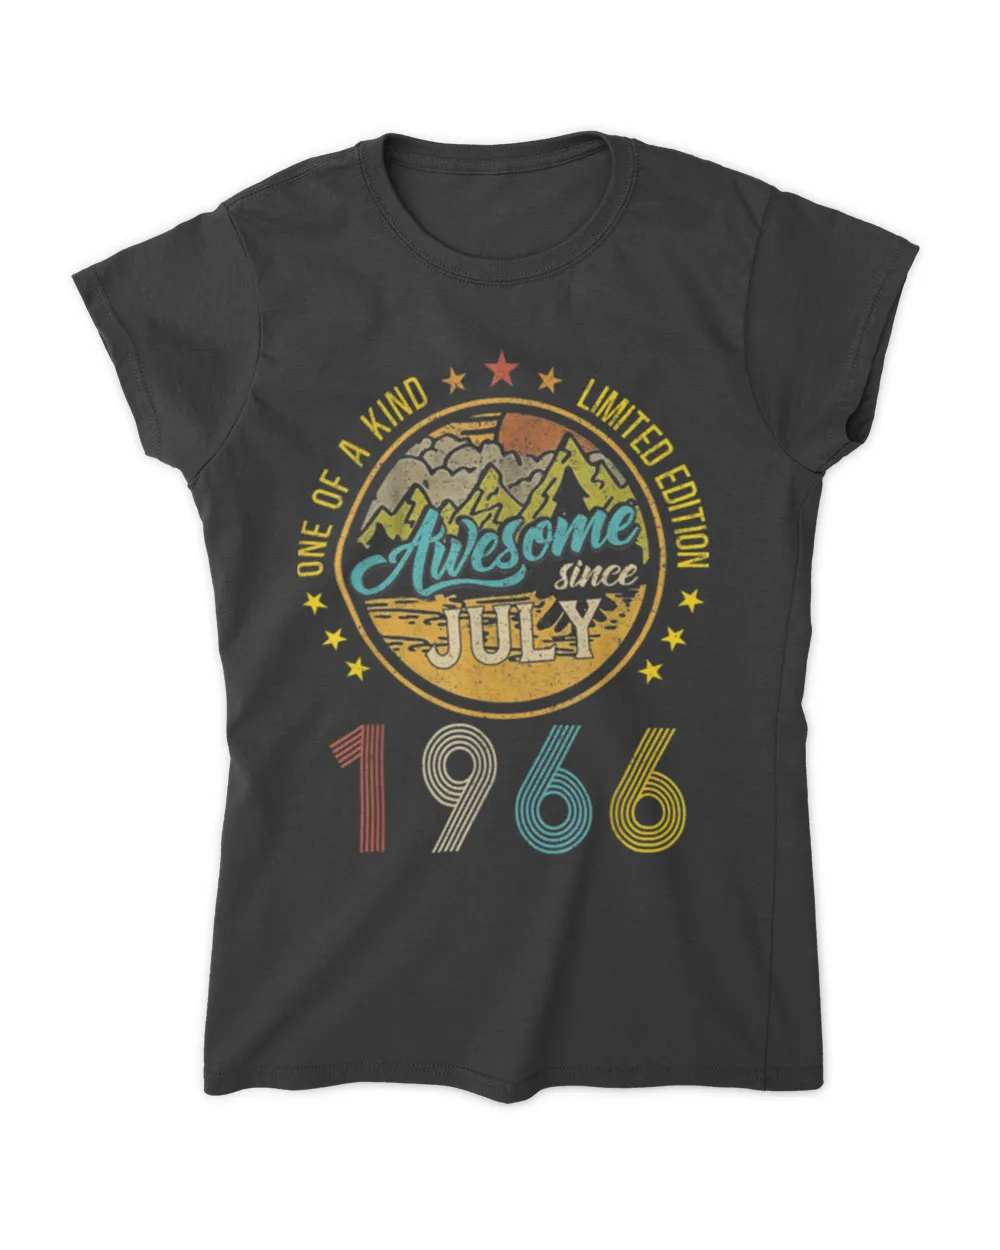 Vintage 56th Birthday Awesome Since July 1966 Epic Legend T-Shirt tee